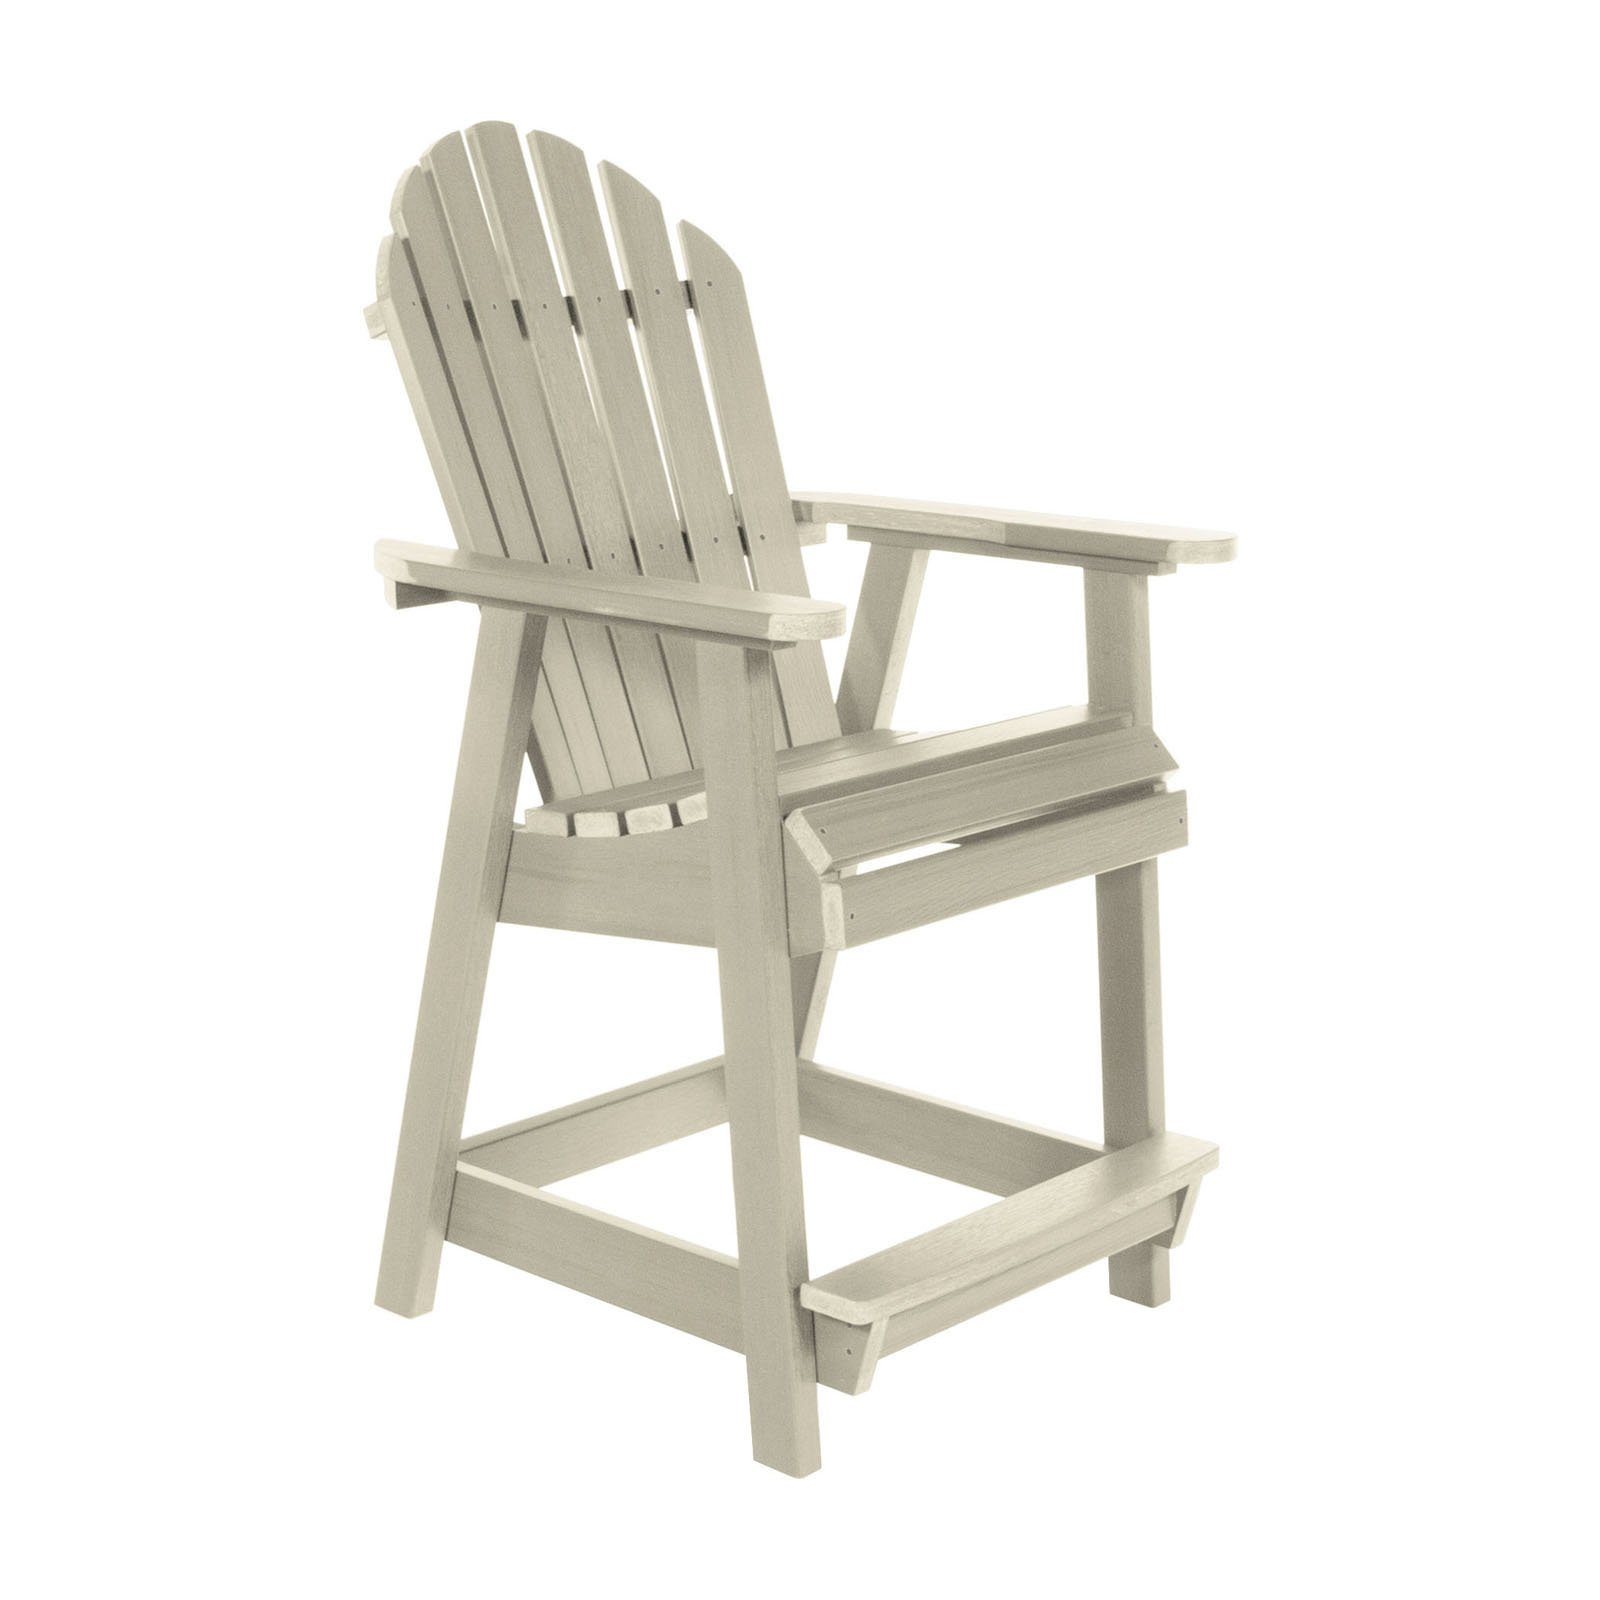 The Sequoia Professional Commercial Grade Muskoka Adirondack Deck Dining Chair in Counter Height - image 1 of 2